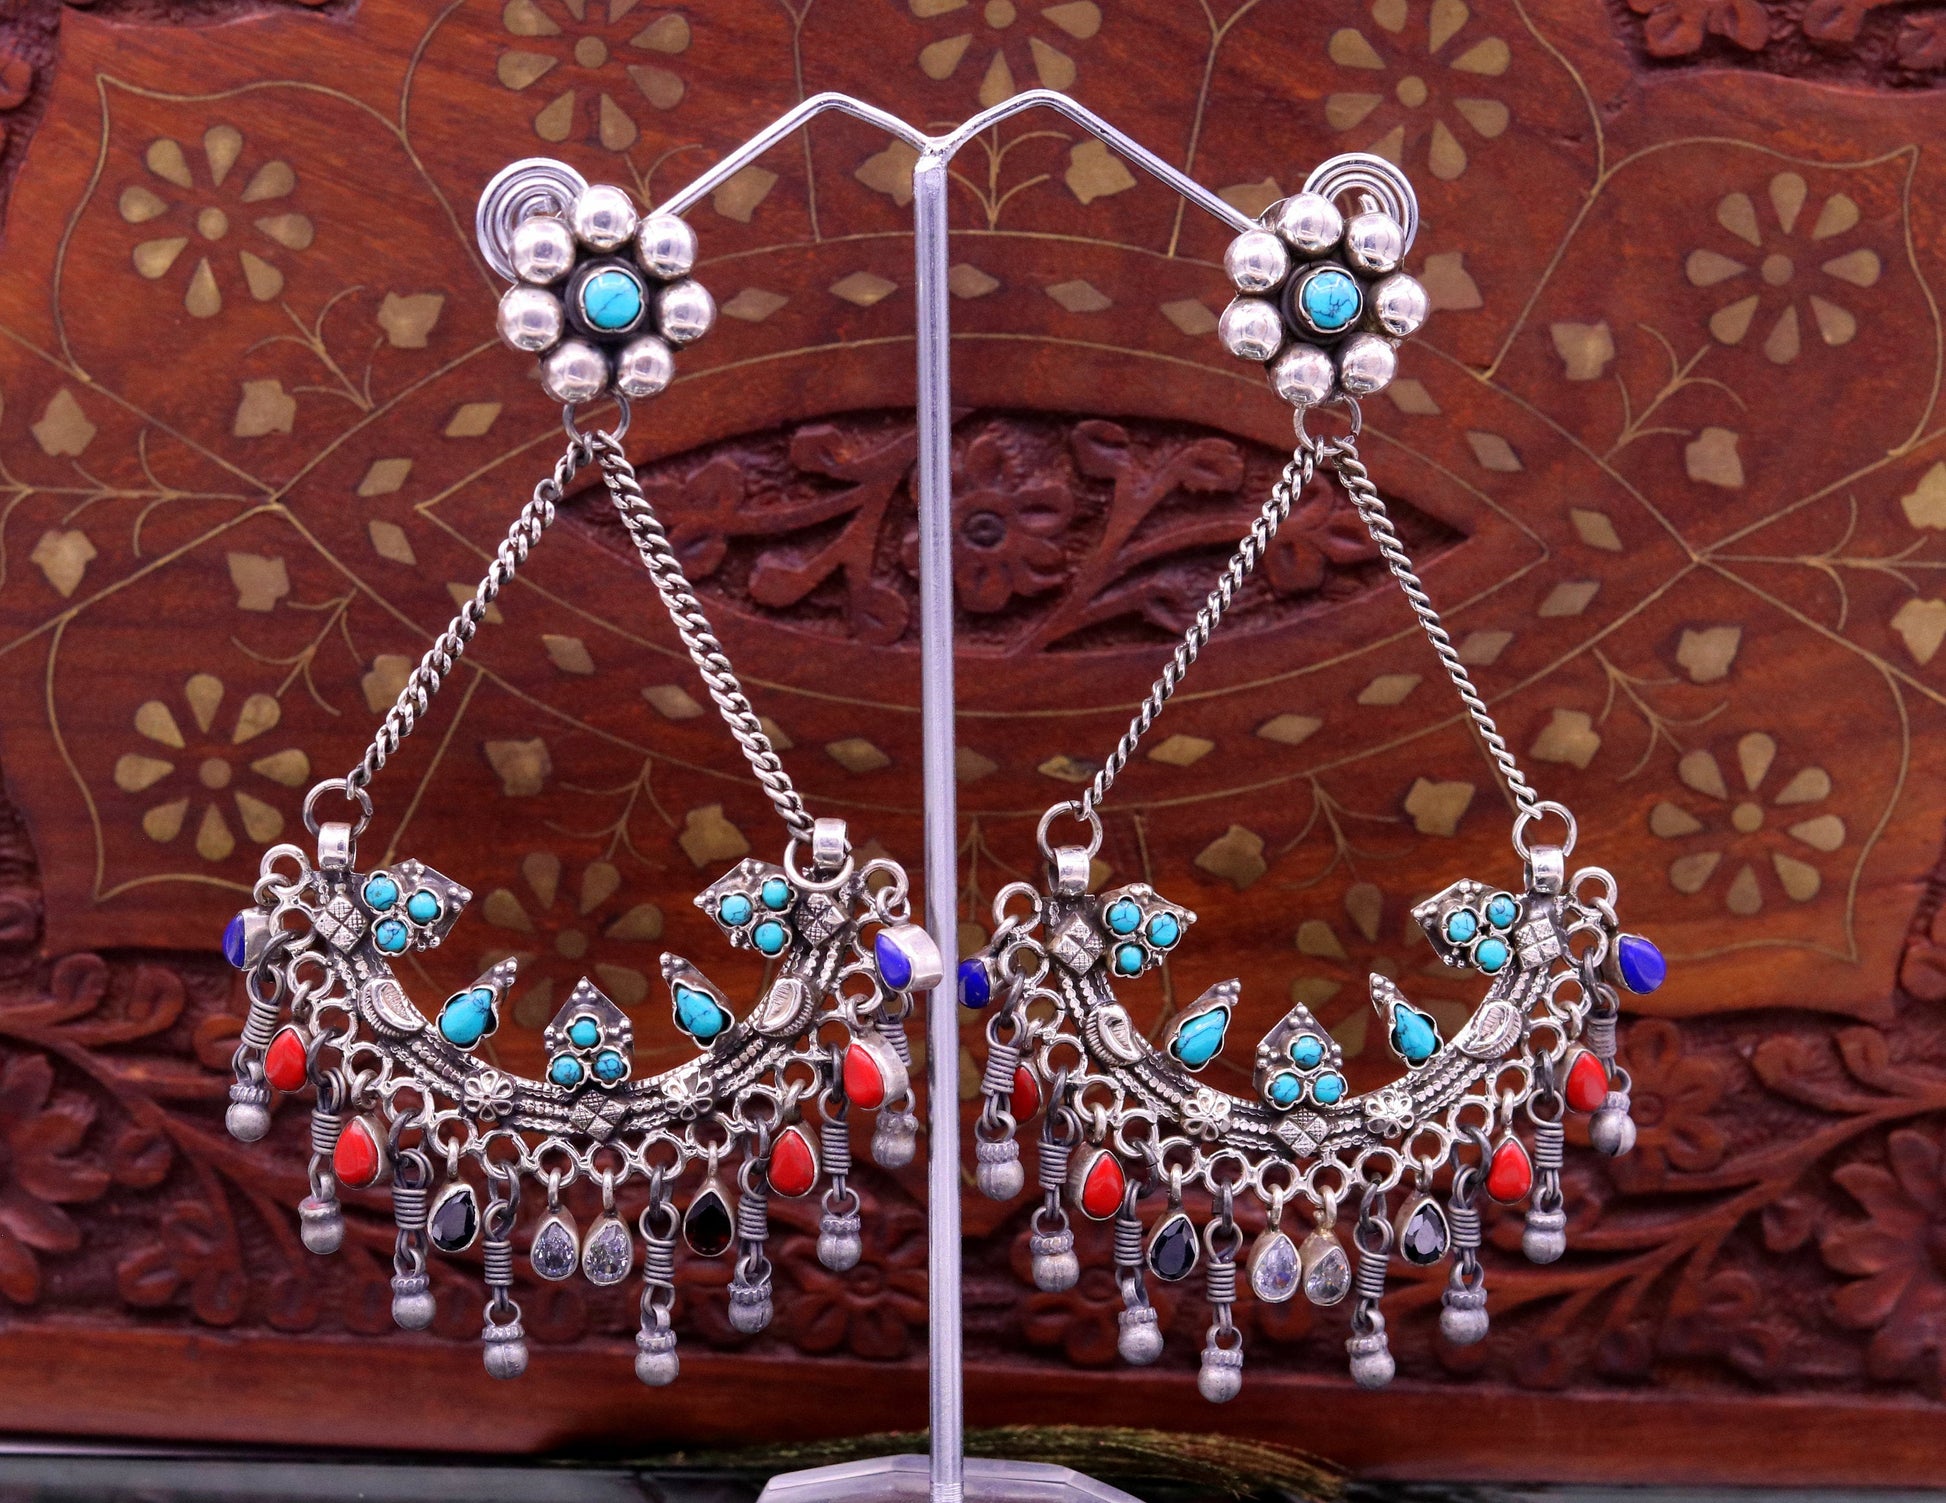 925 sterling silver handmade turquoise and coral stone fabulous long charm earring stud, drop dangle chandbala chandelier style jewelry s724 - TRIBAL ORNAMENTS